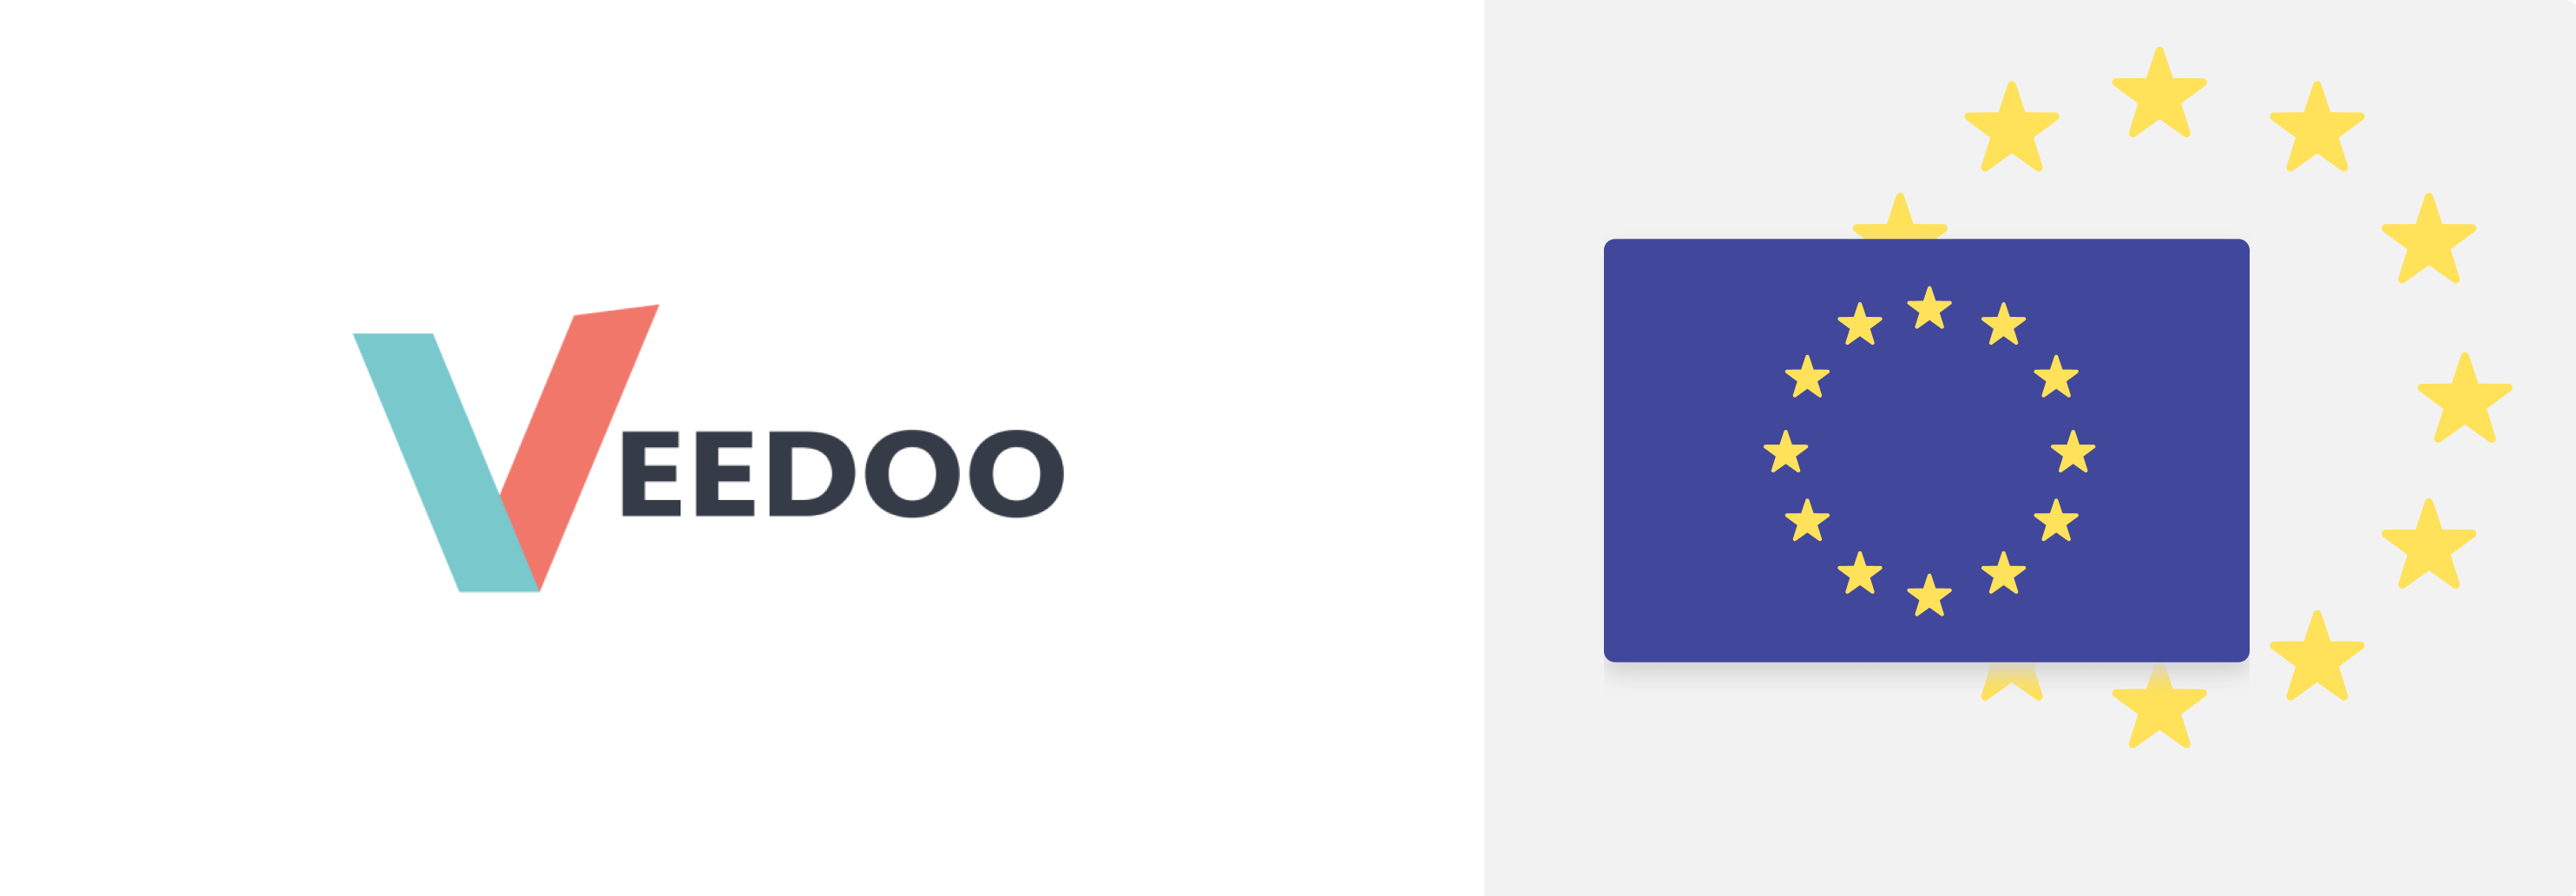 The image consists of two parts, the first part shows the VEEDOO logo, the second part shows the flag of the European Union